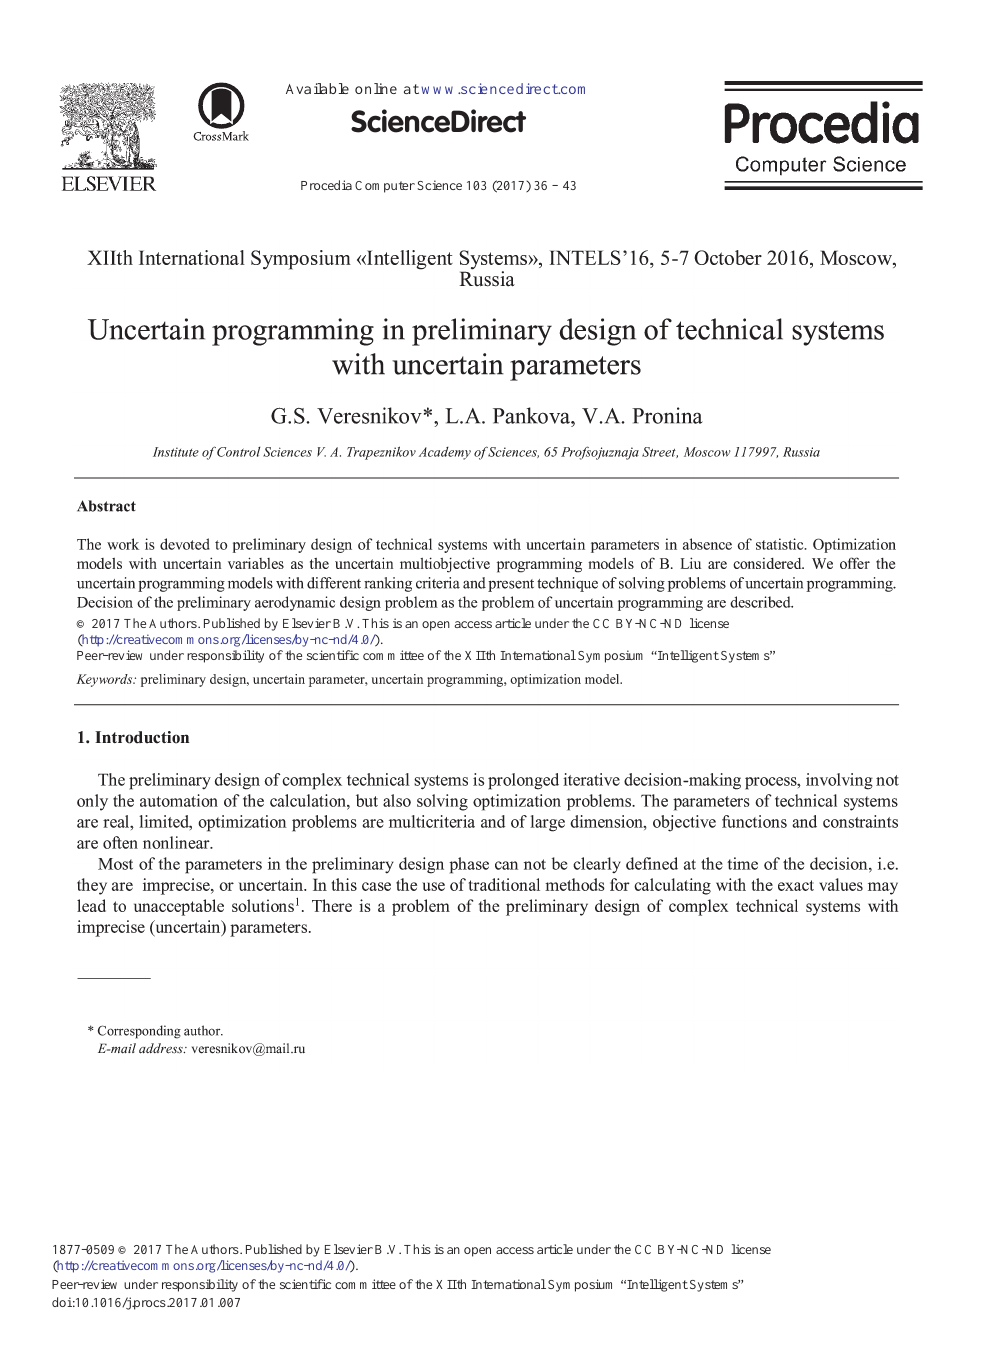 Uncertain Programming In Preliminary Design Of Technical Systems With Uncertain Parameters Topic Of Research Paper In Mechanical Engineering Download Scholarly Article Pdf And Read For Free On Cyberleninka Open Science Hub